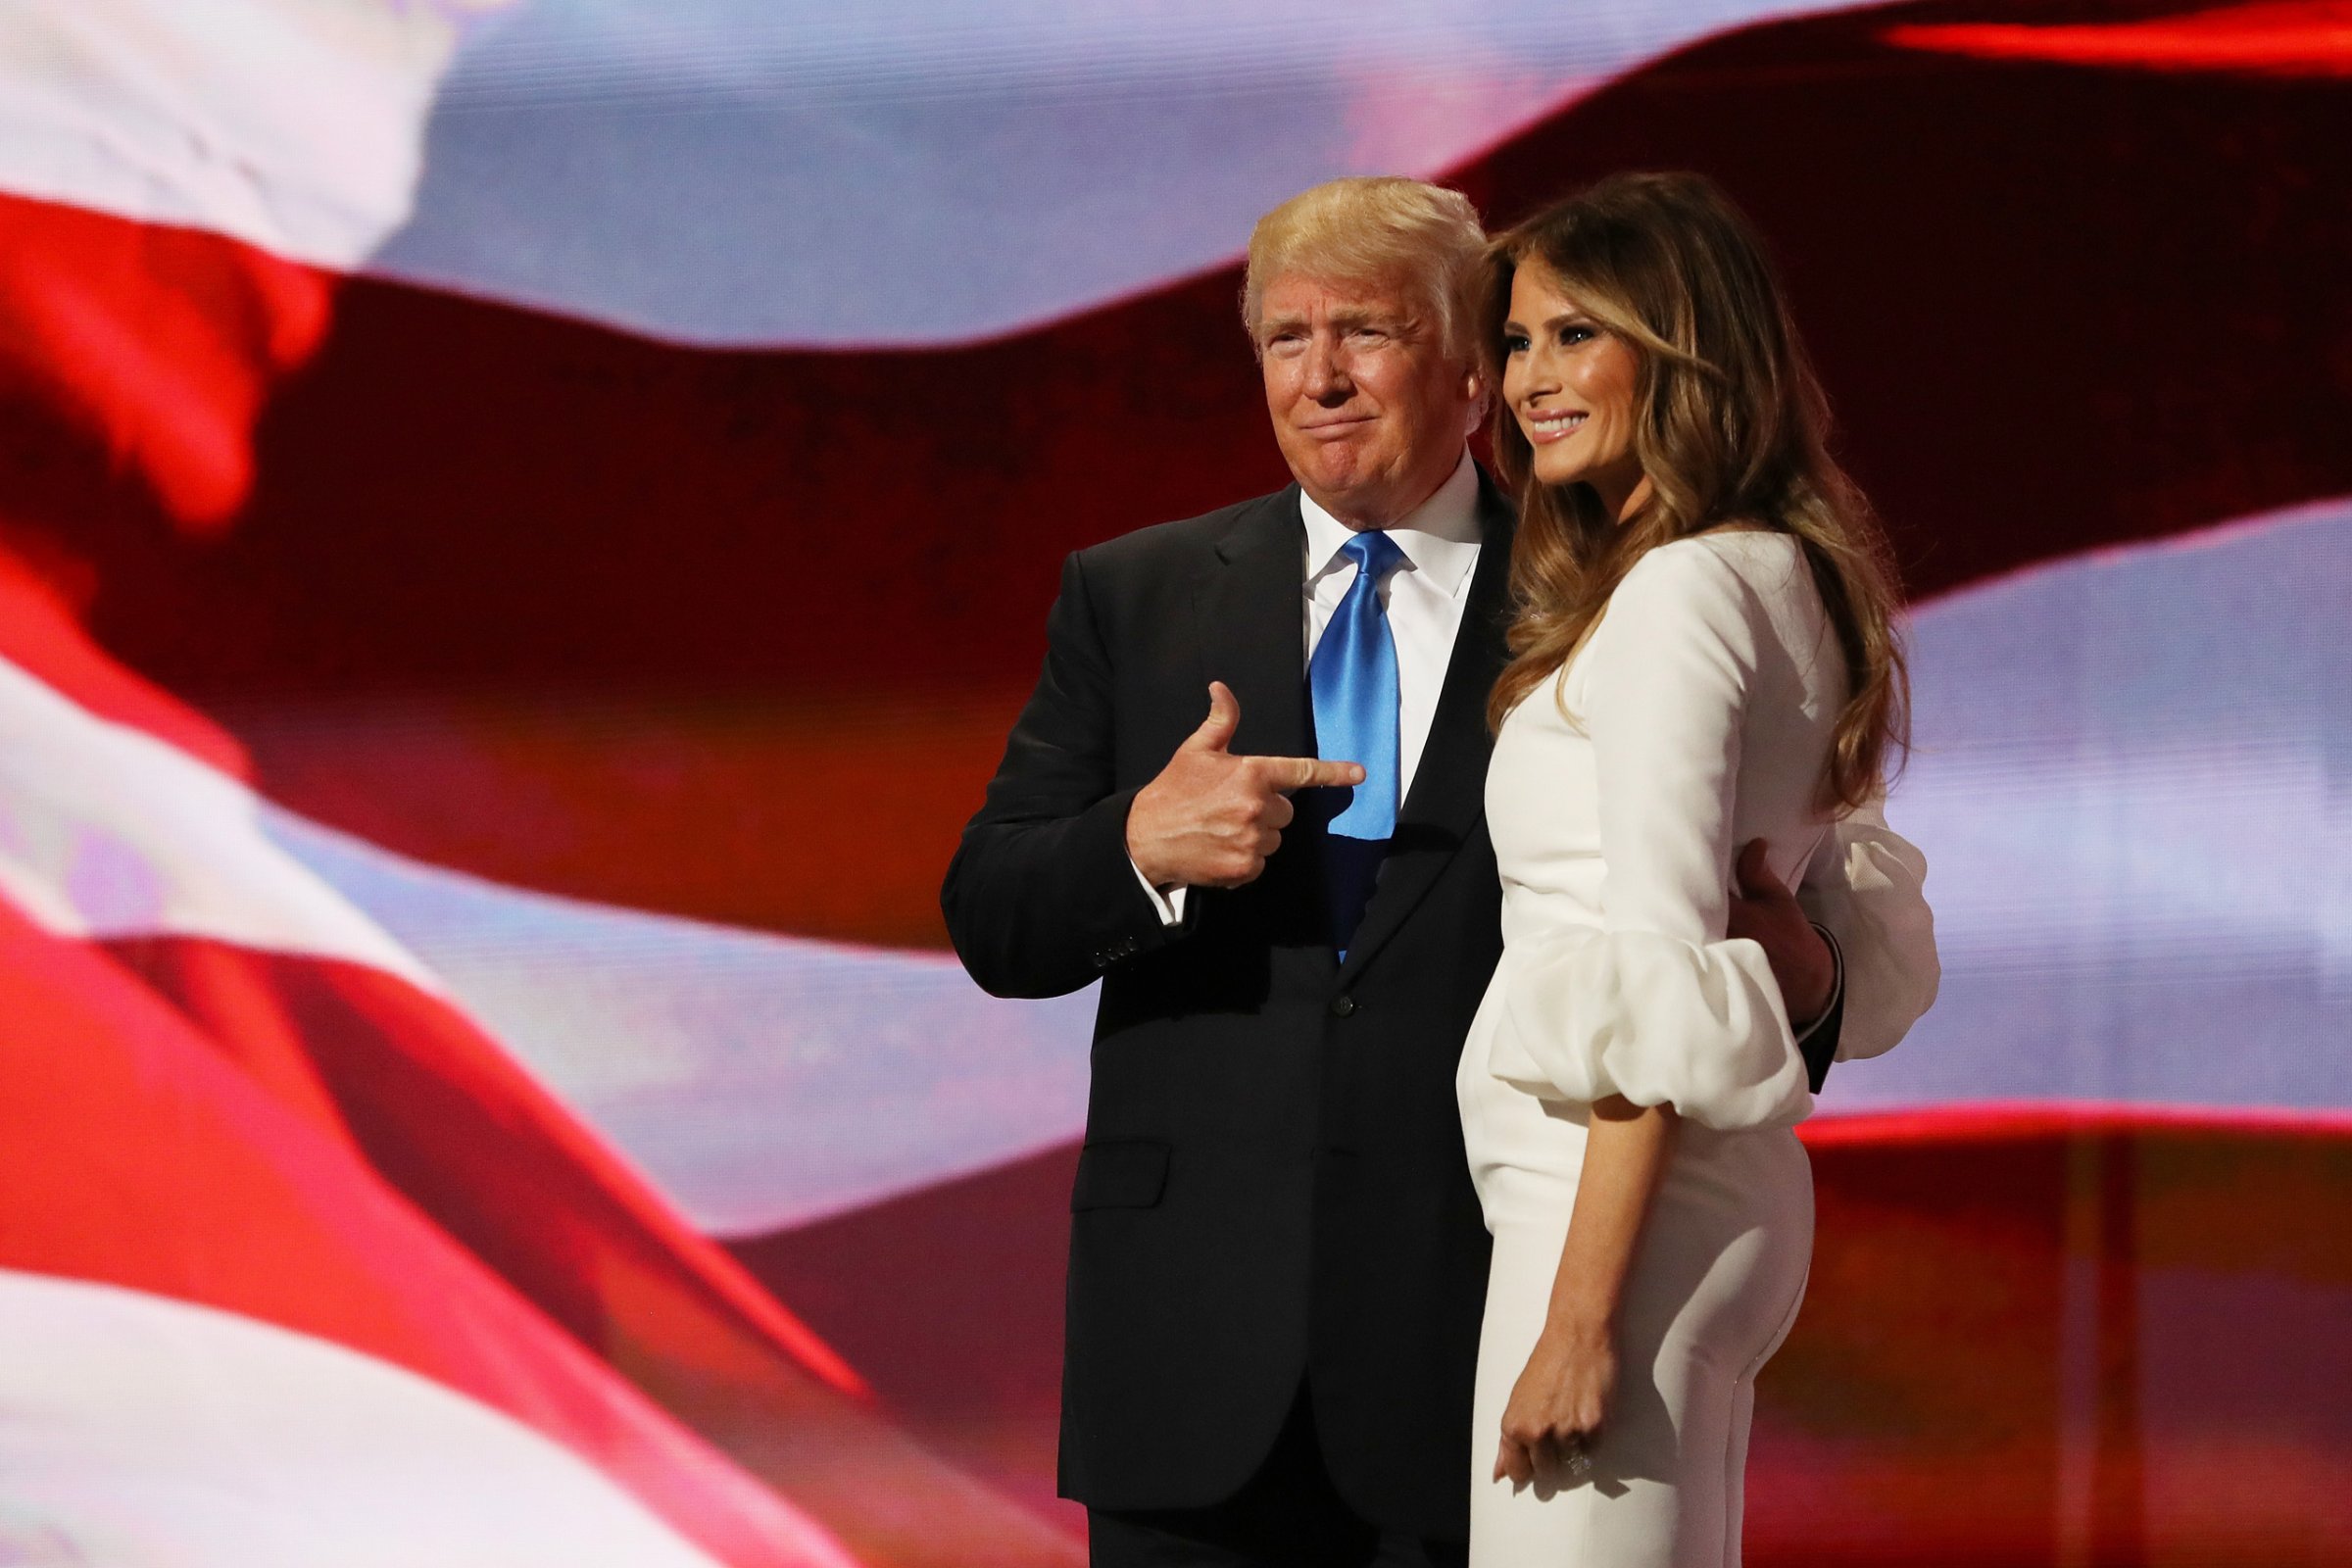 Republican presidential nominee Donald Trump gestures to his wife Melania after she delivered a speech on the first day of the Republican National Convention at the Quicken Loans Arena in Cleveland on July 18, 2016.